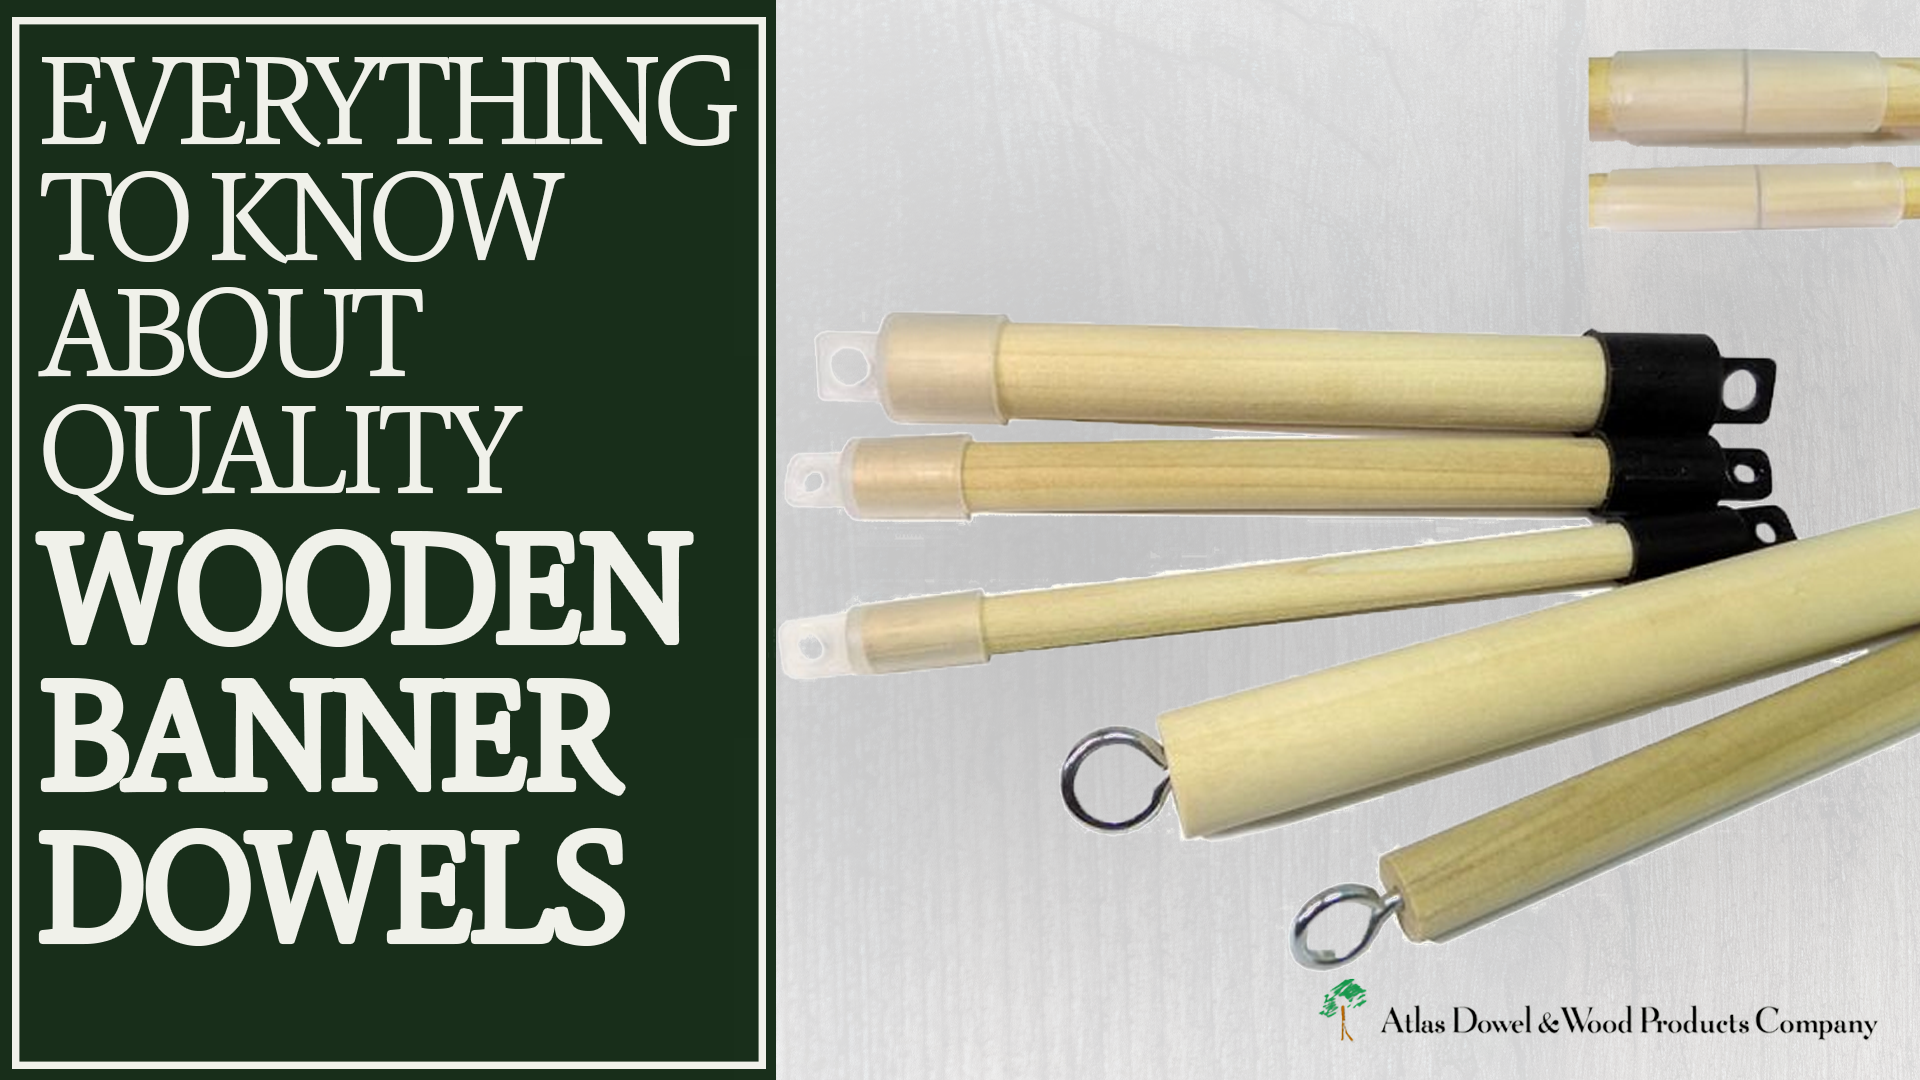 Everything to Know About Quality Wooden Banner Dowels